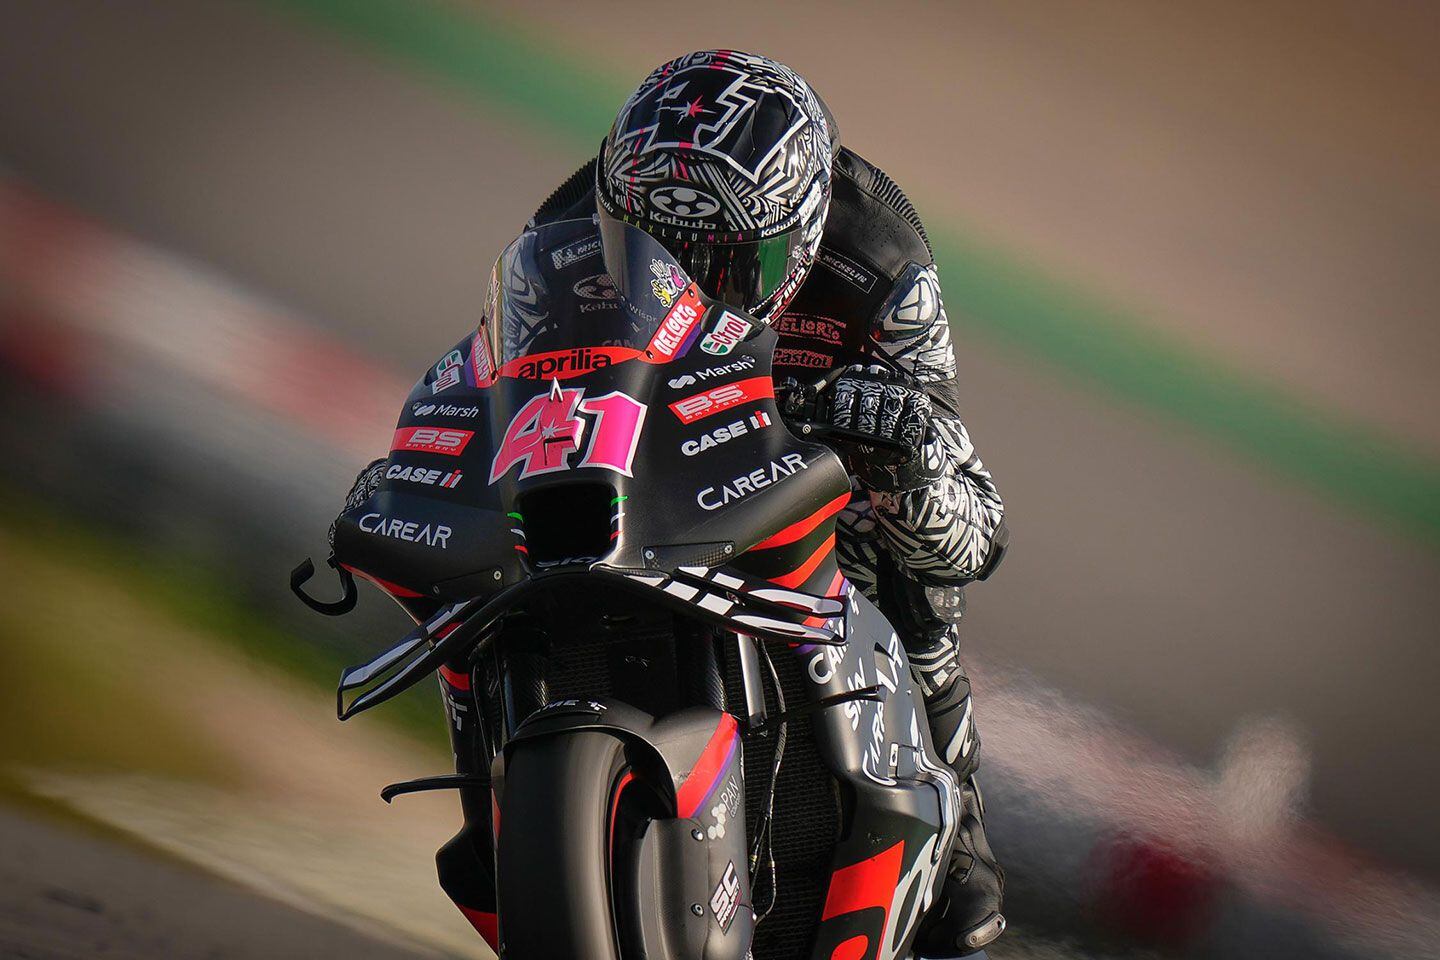 Aprilia’s efforts to smooth the surfaces at the front of its MotoGP racers includes smoothing the flow over fork legs and brakes.